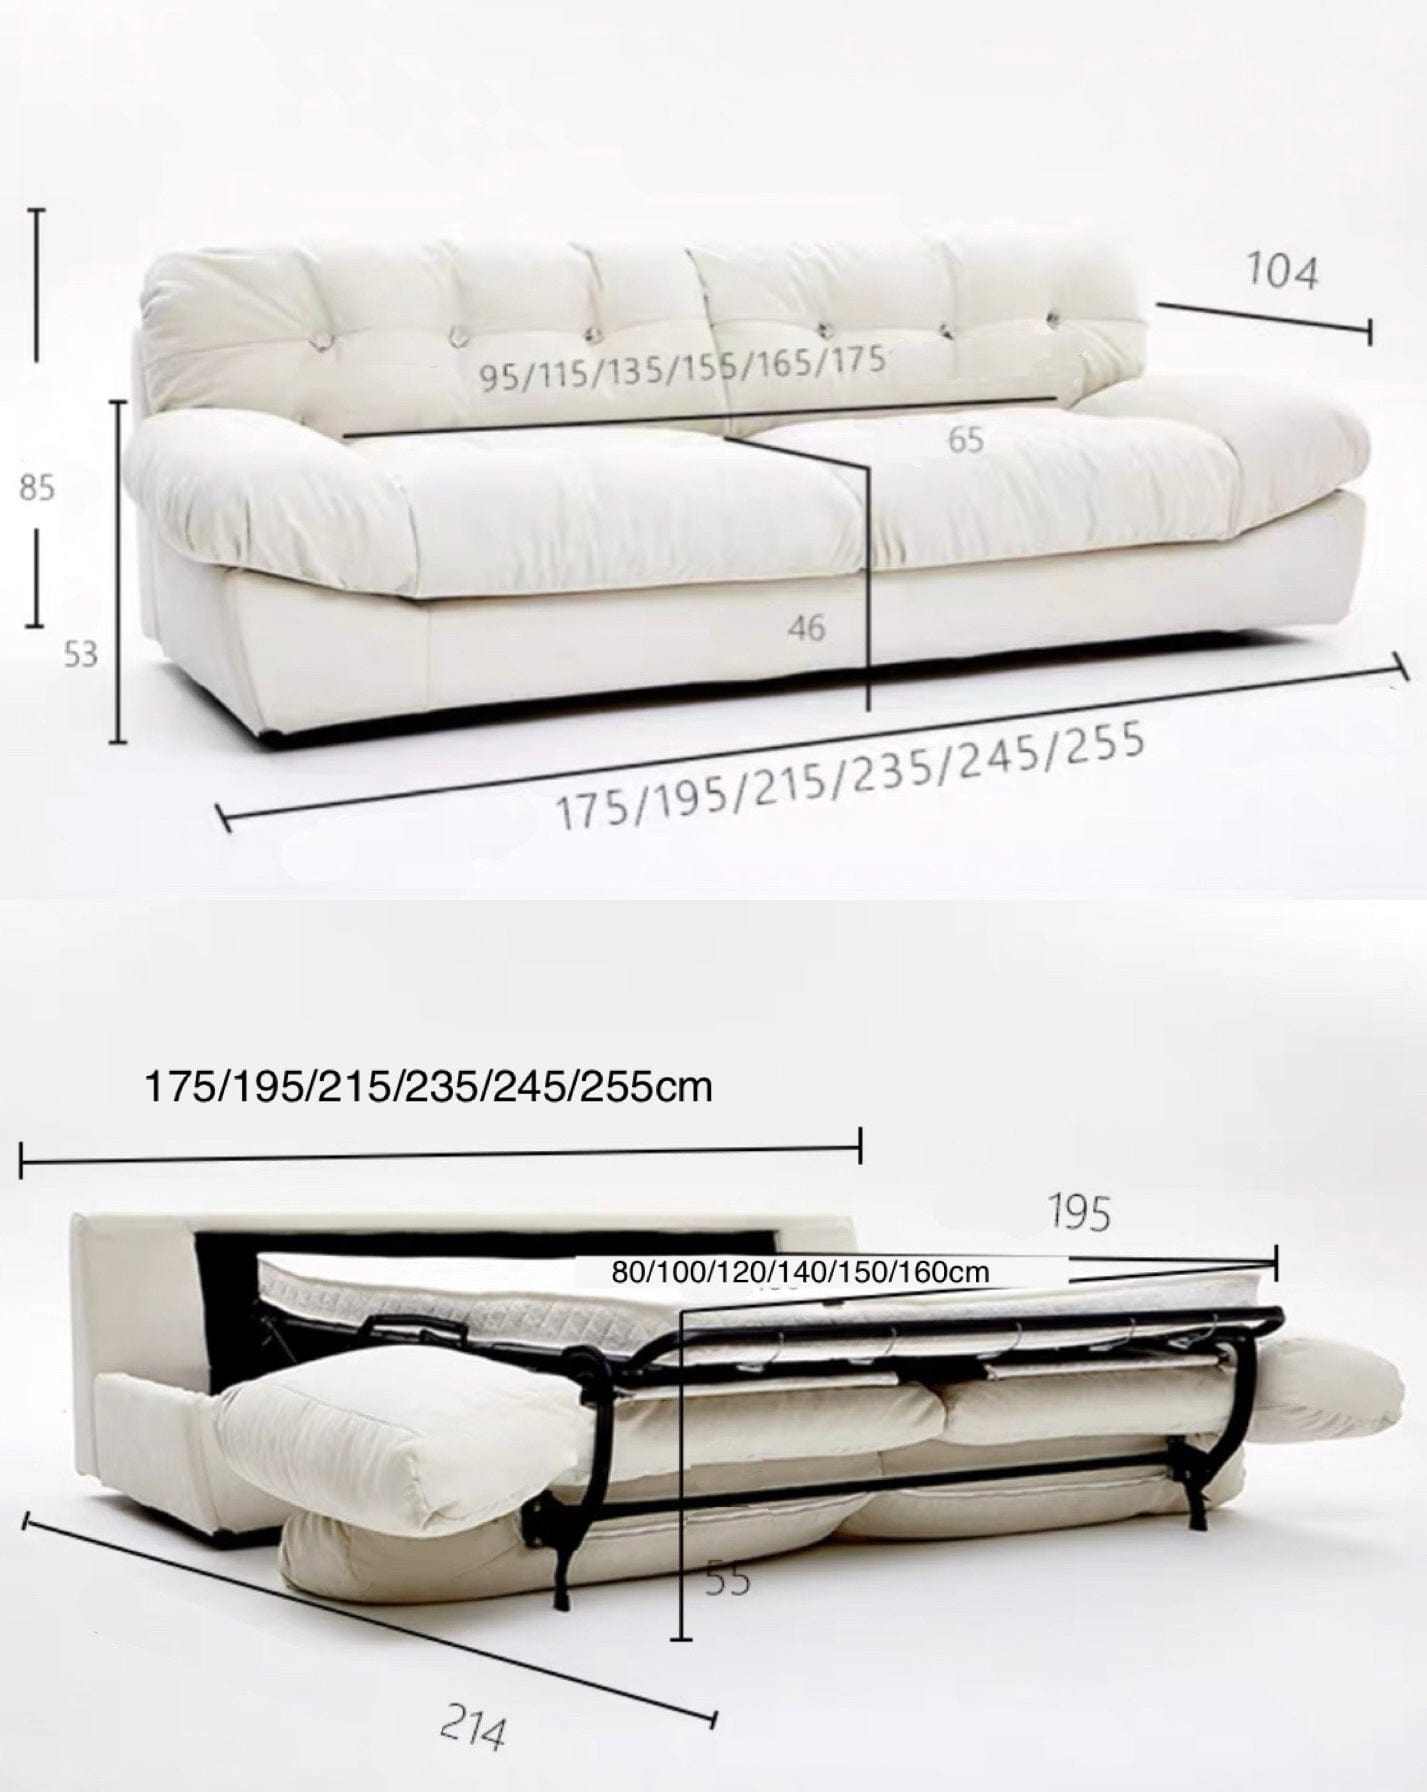 Home Atelier Orion Foldable Sofa Bed with Mattress